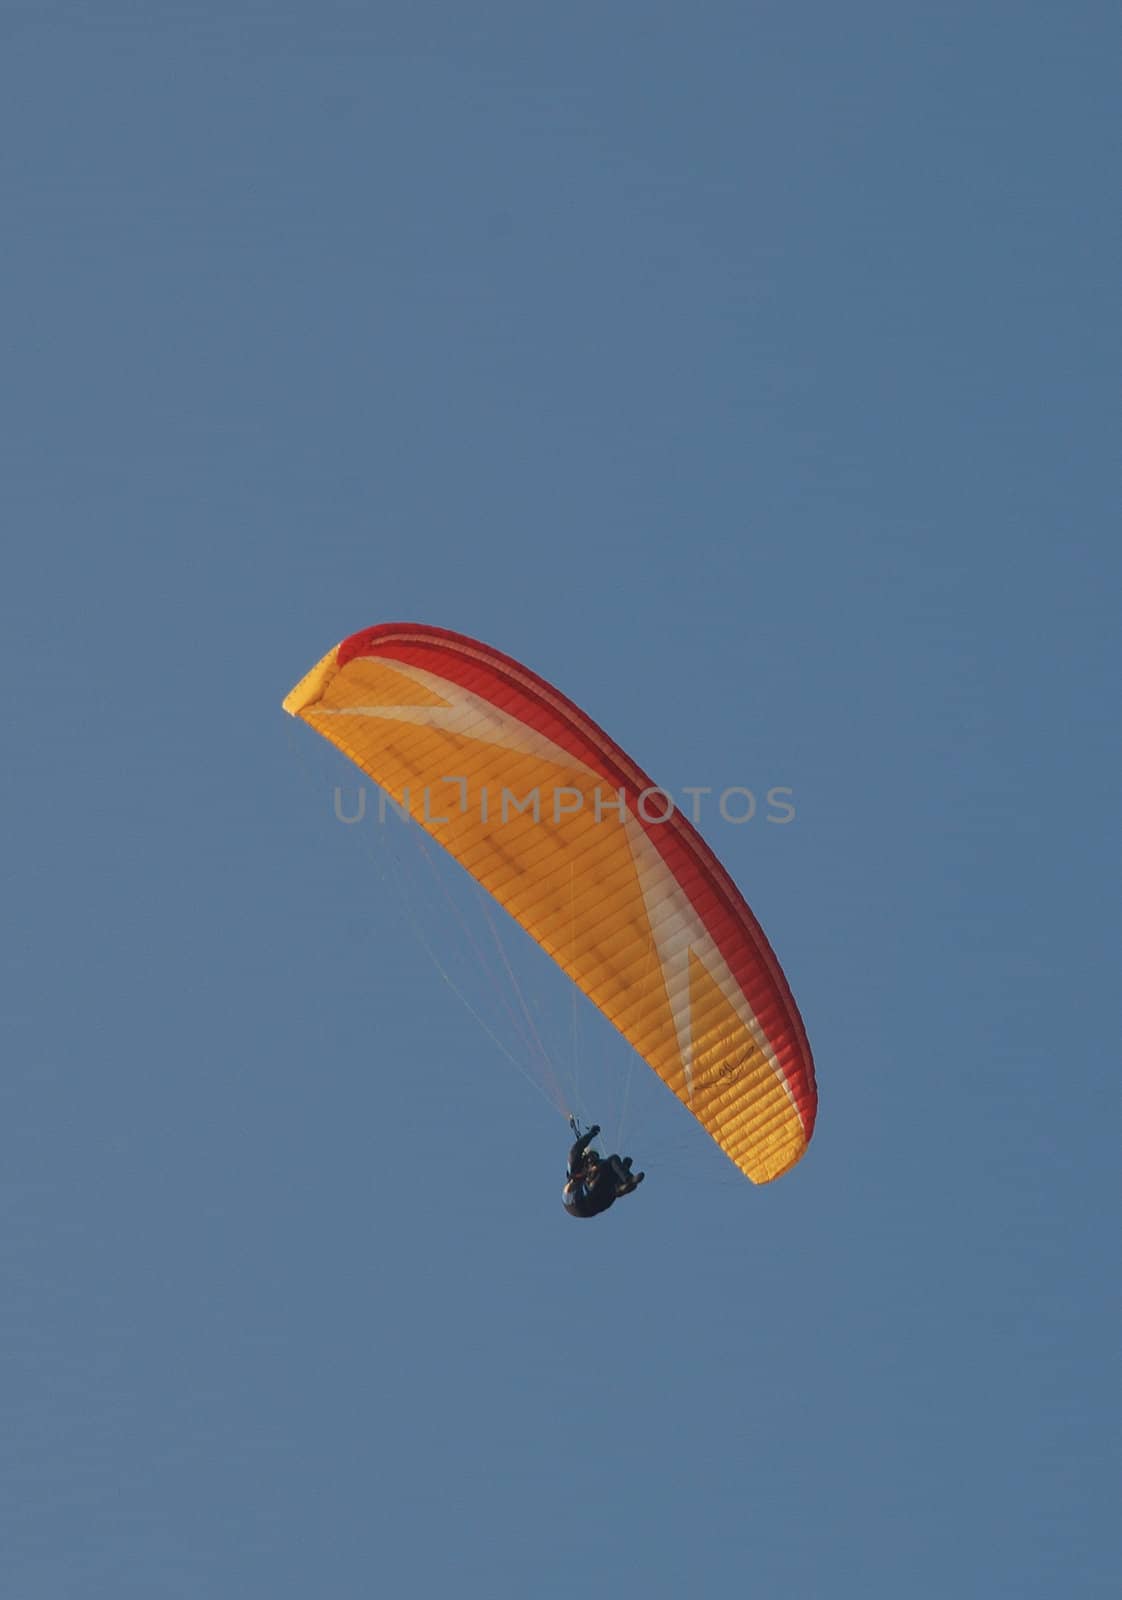 Parapente by BZH22